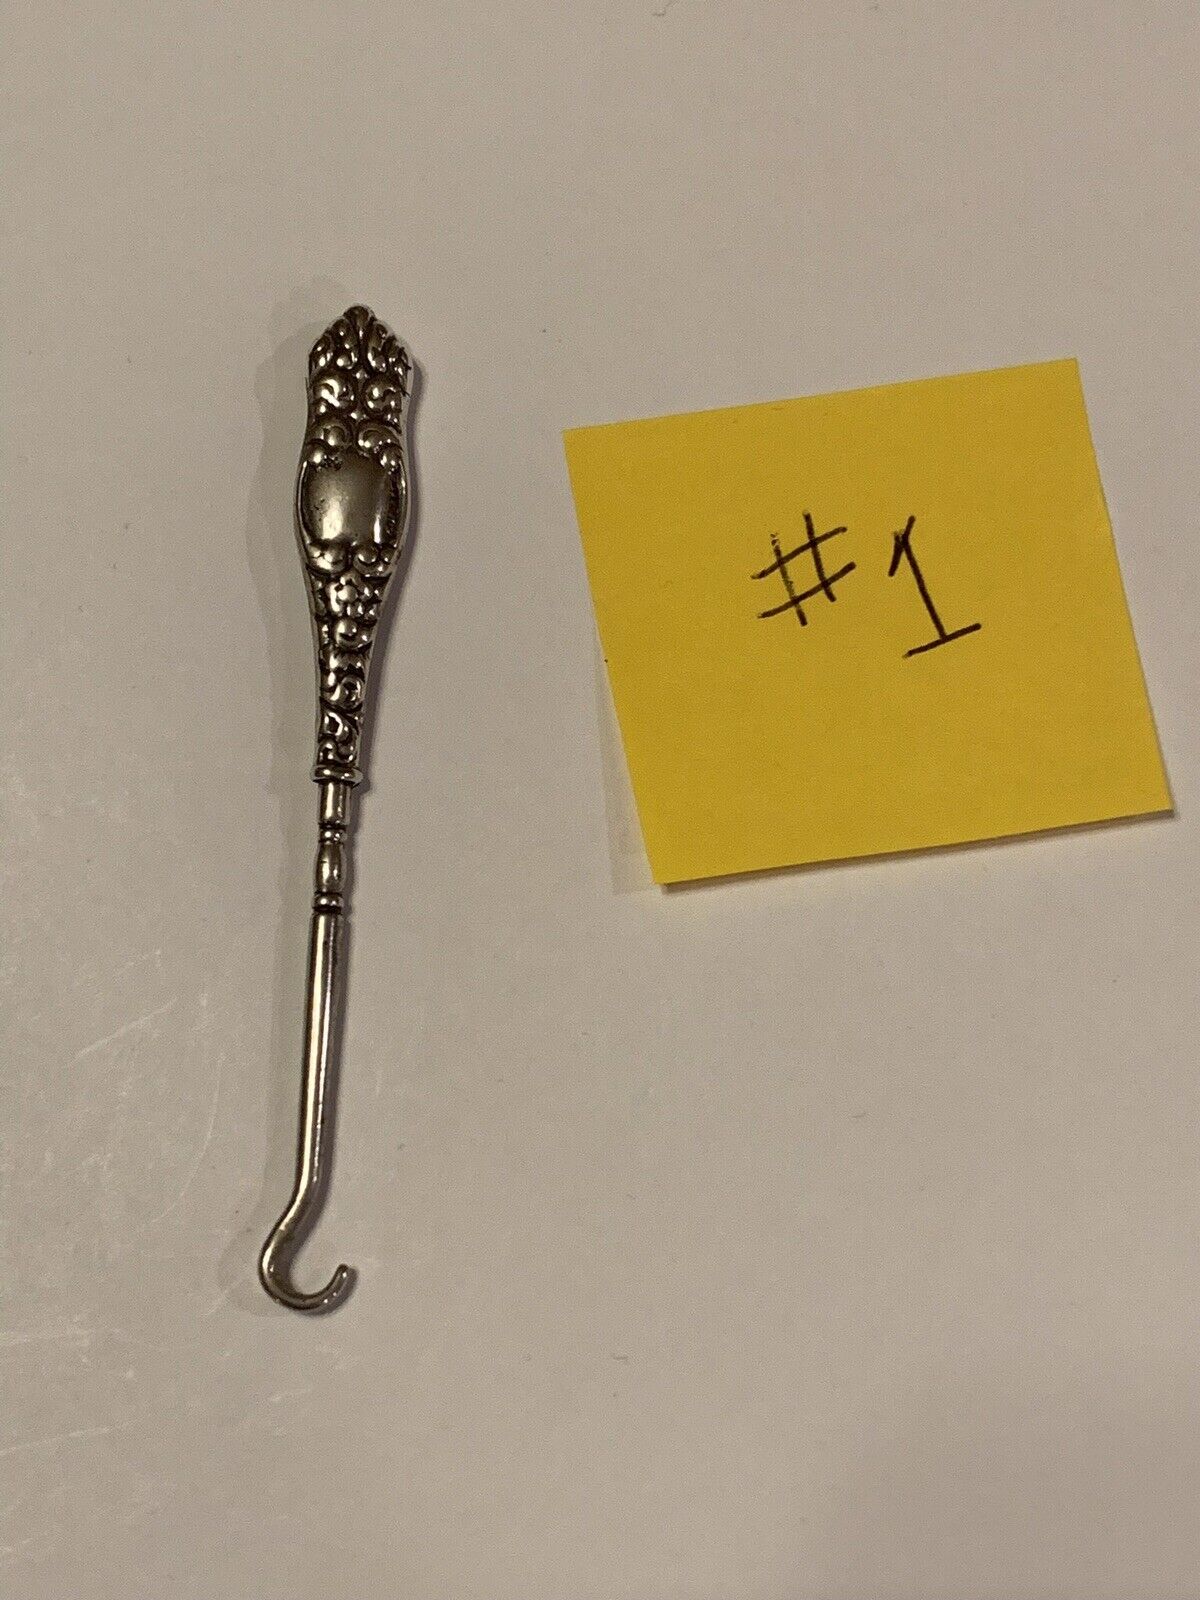 Antique Sterling Silver Glove Shoe Button Hook 3” Vanity Tool Excellent Cond. #1